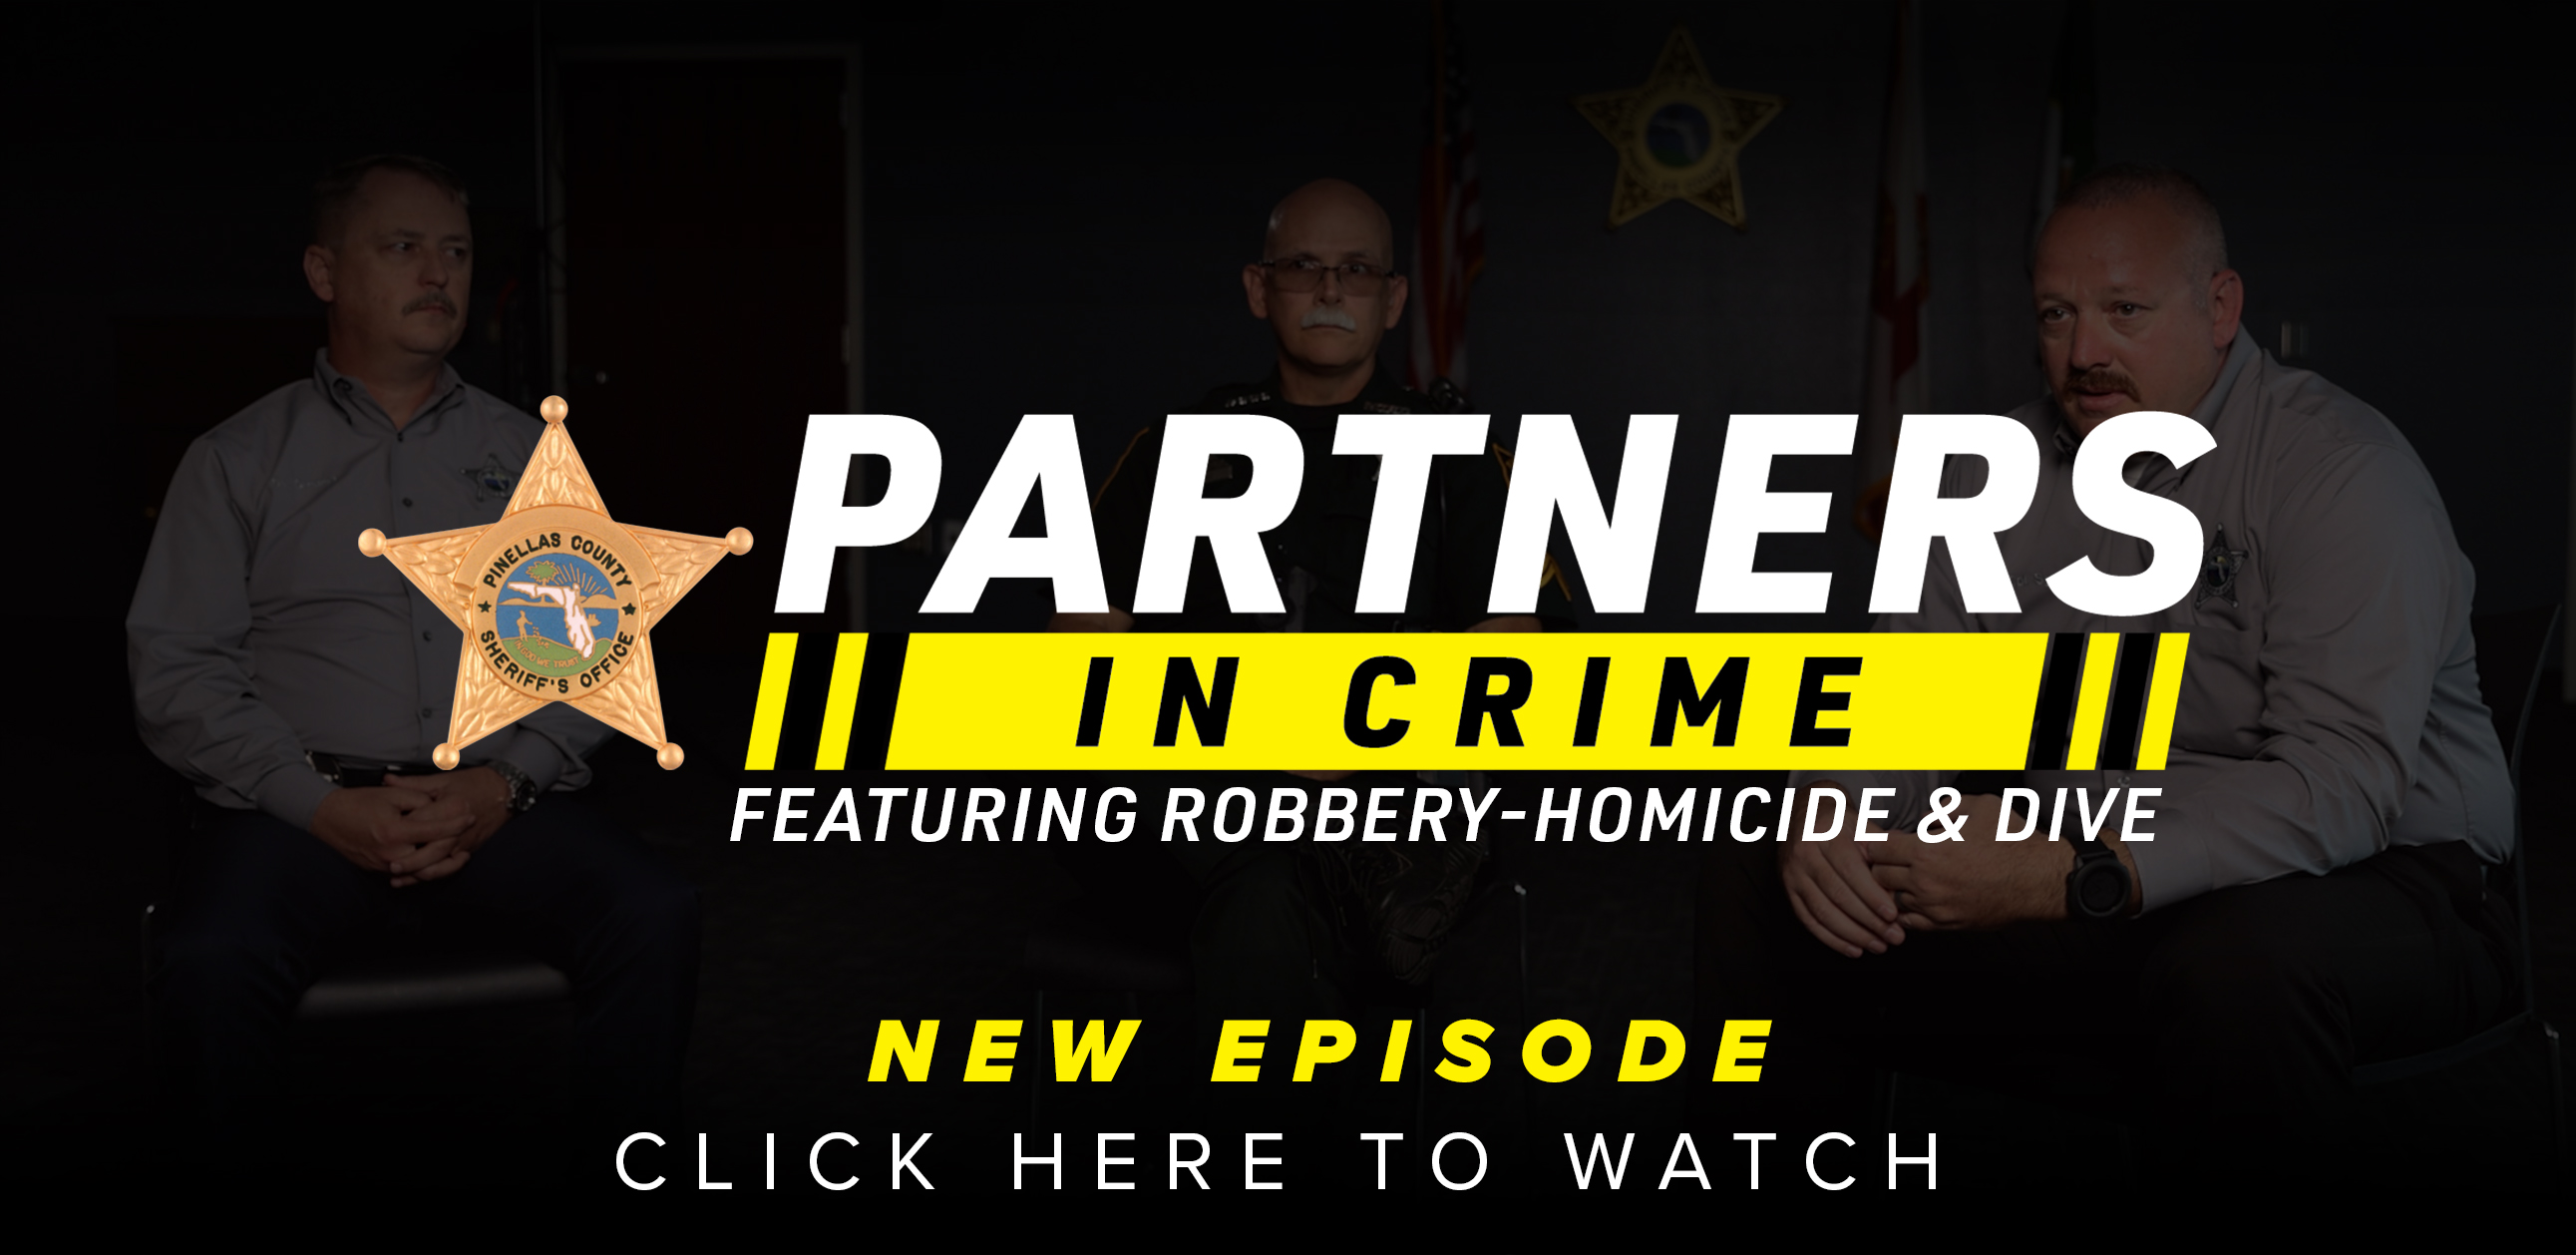 Paterners, Robbery-Homicide and Dive